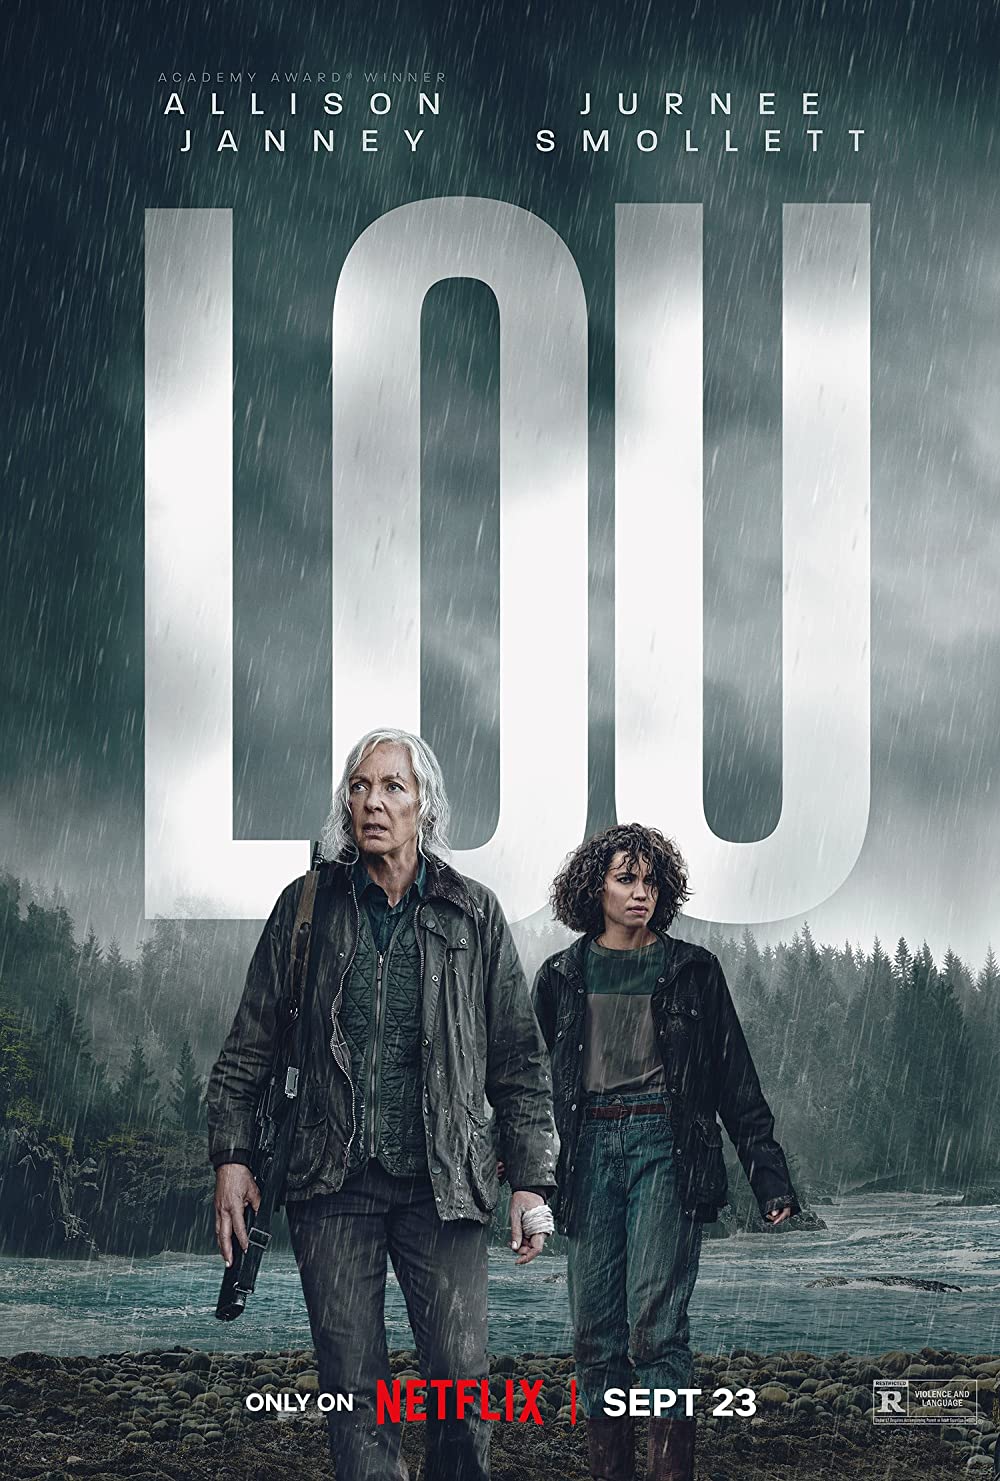  Lou Movie 2022, Official Trailer, Release Date, HD Poster